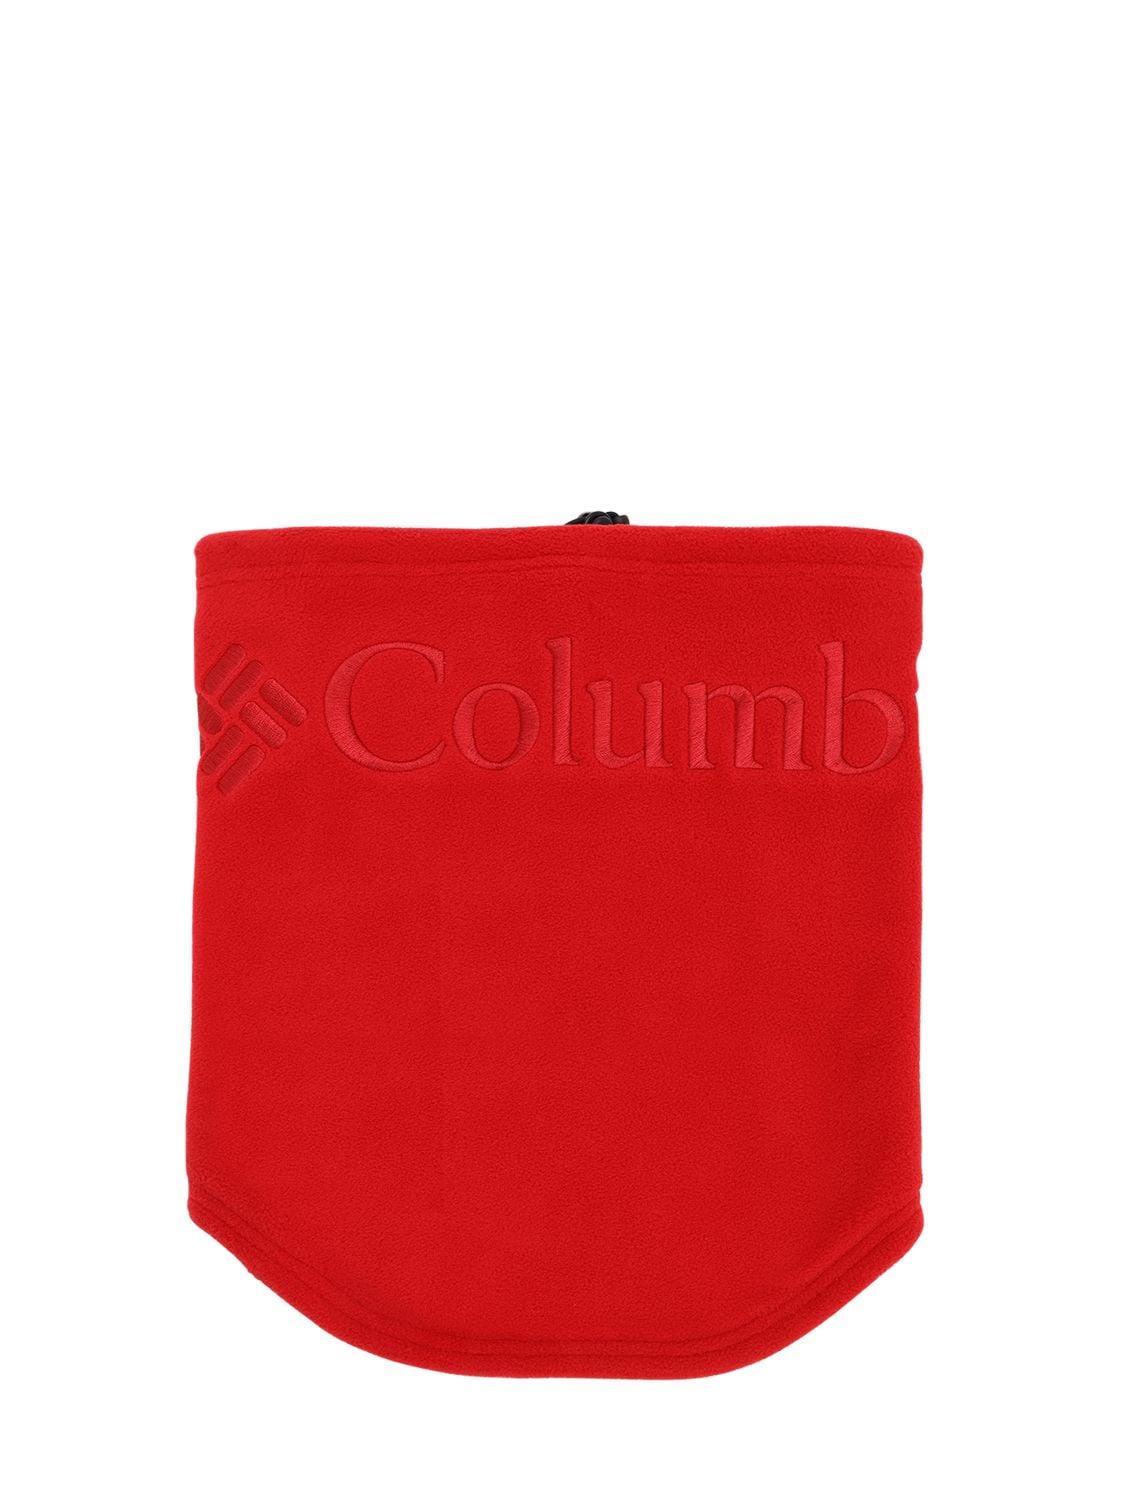 Columbia Csc Techno Gaiter In Red